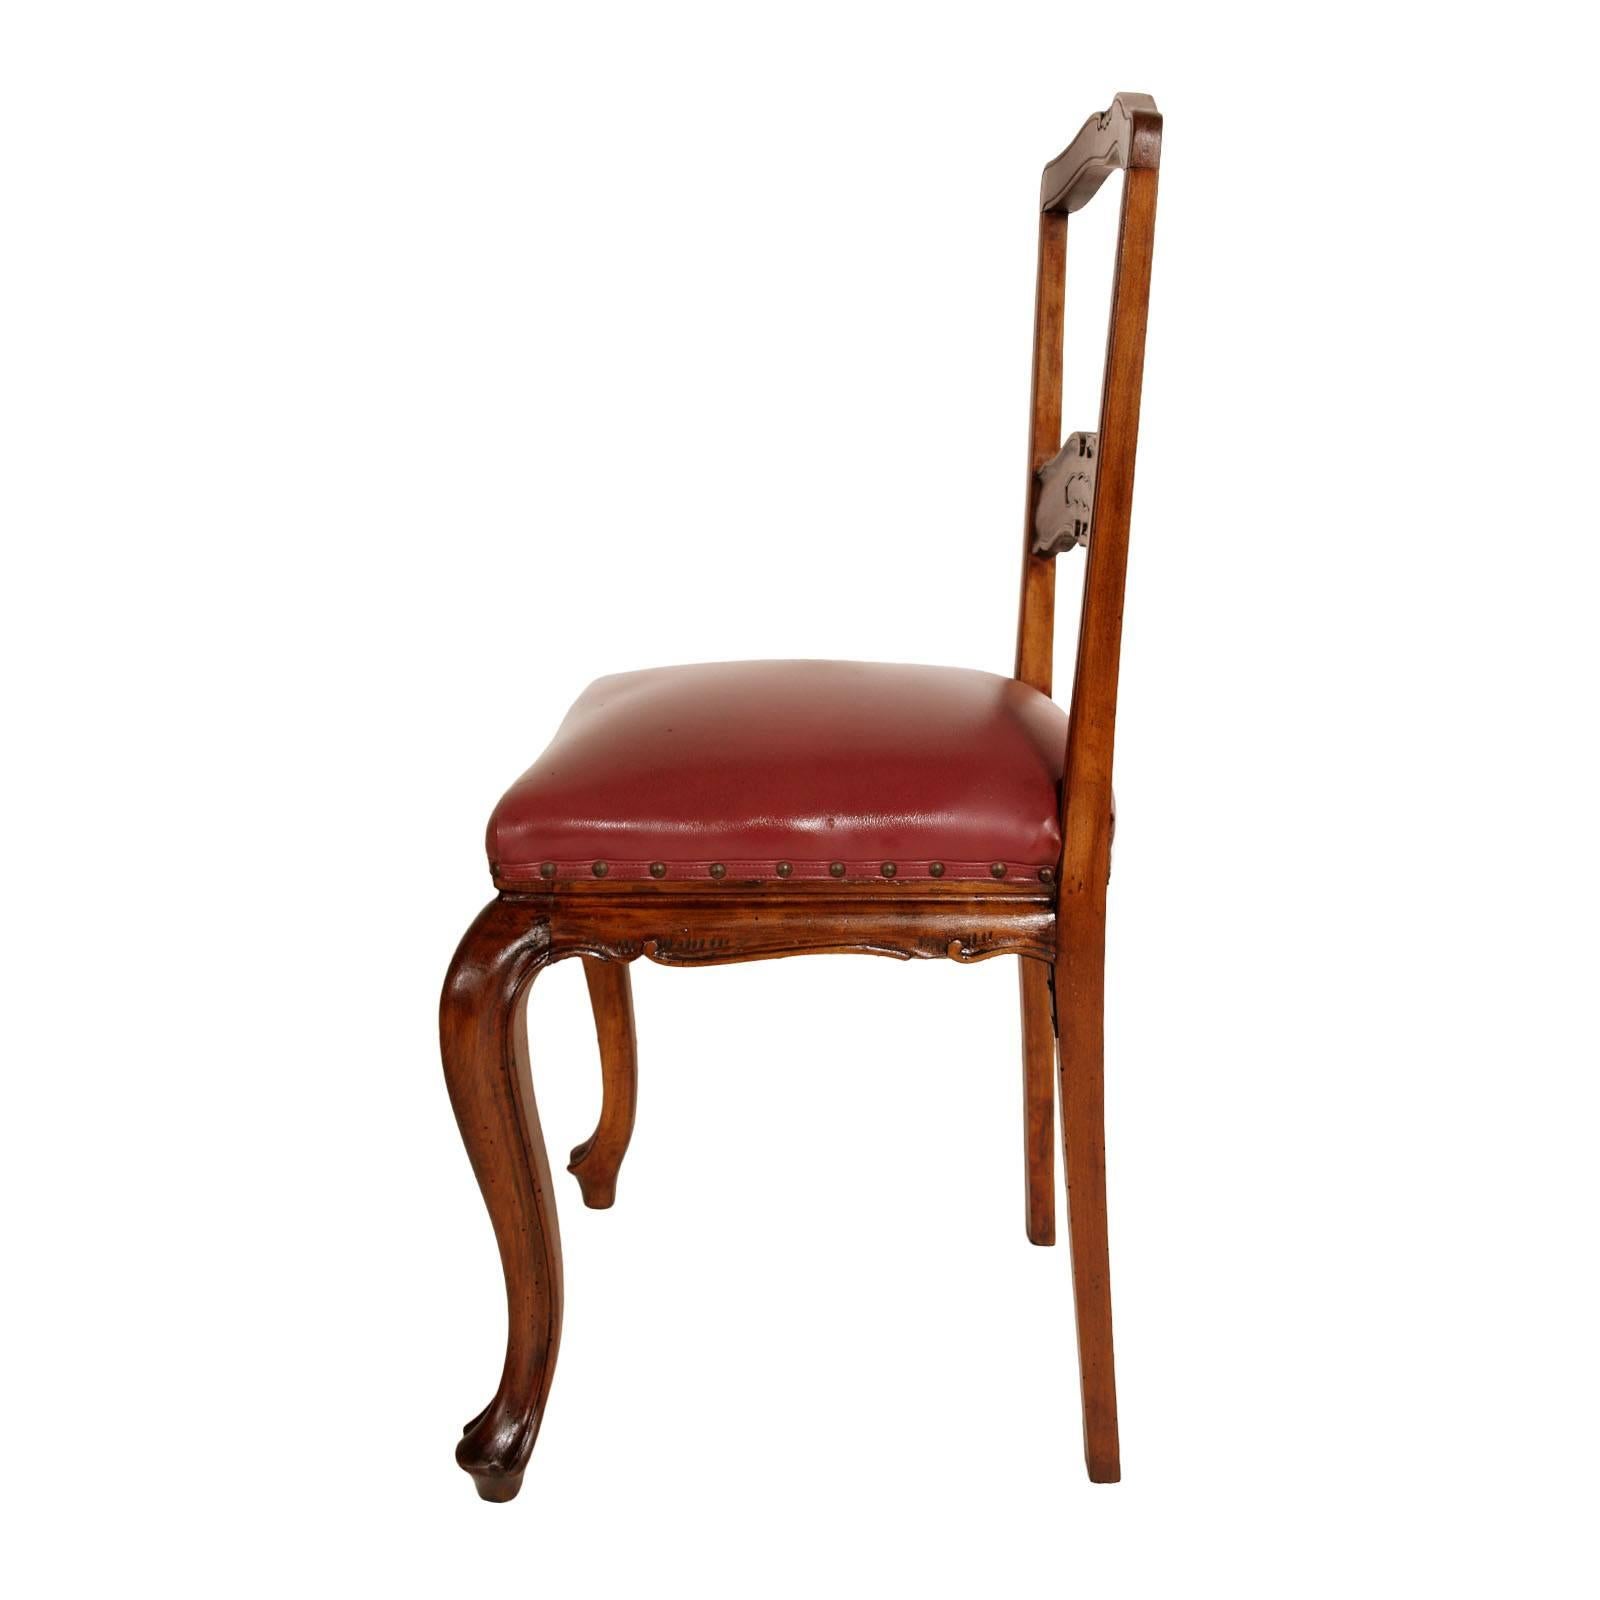 19th Century Pair Art Nouveau Neoclassical Chairs , Hand-Carved Walnut, Spring Leather Seat For Sale